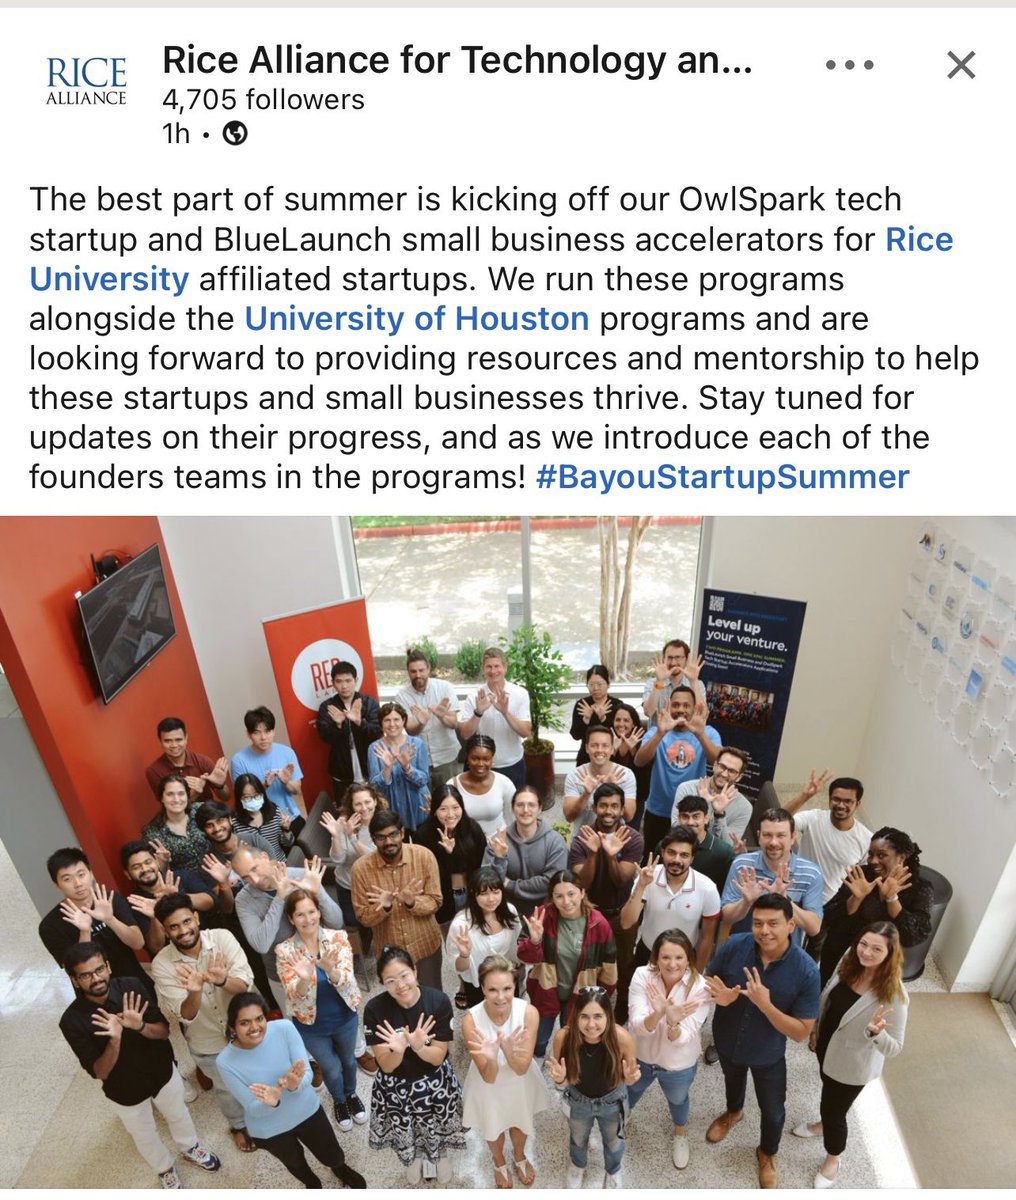 At @aikynetix we are absolutely thrilled to be part of the RICE University #OwlSpark accelerator program! The experience thus far has been truly amazing, and I can already tell that this is just the beginning of an incredible journey. 

Denis Akhiyarov #riceuniversity #BlueLaunch